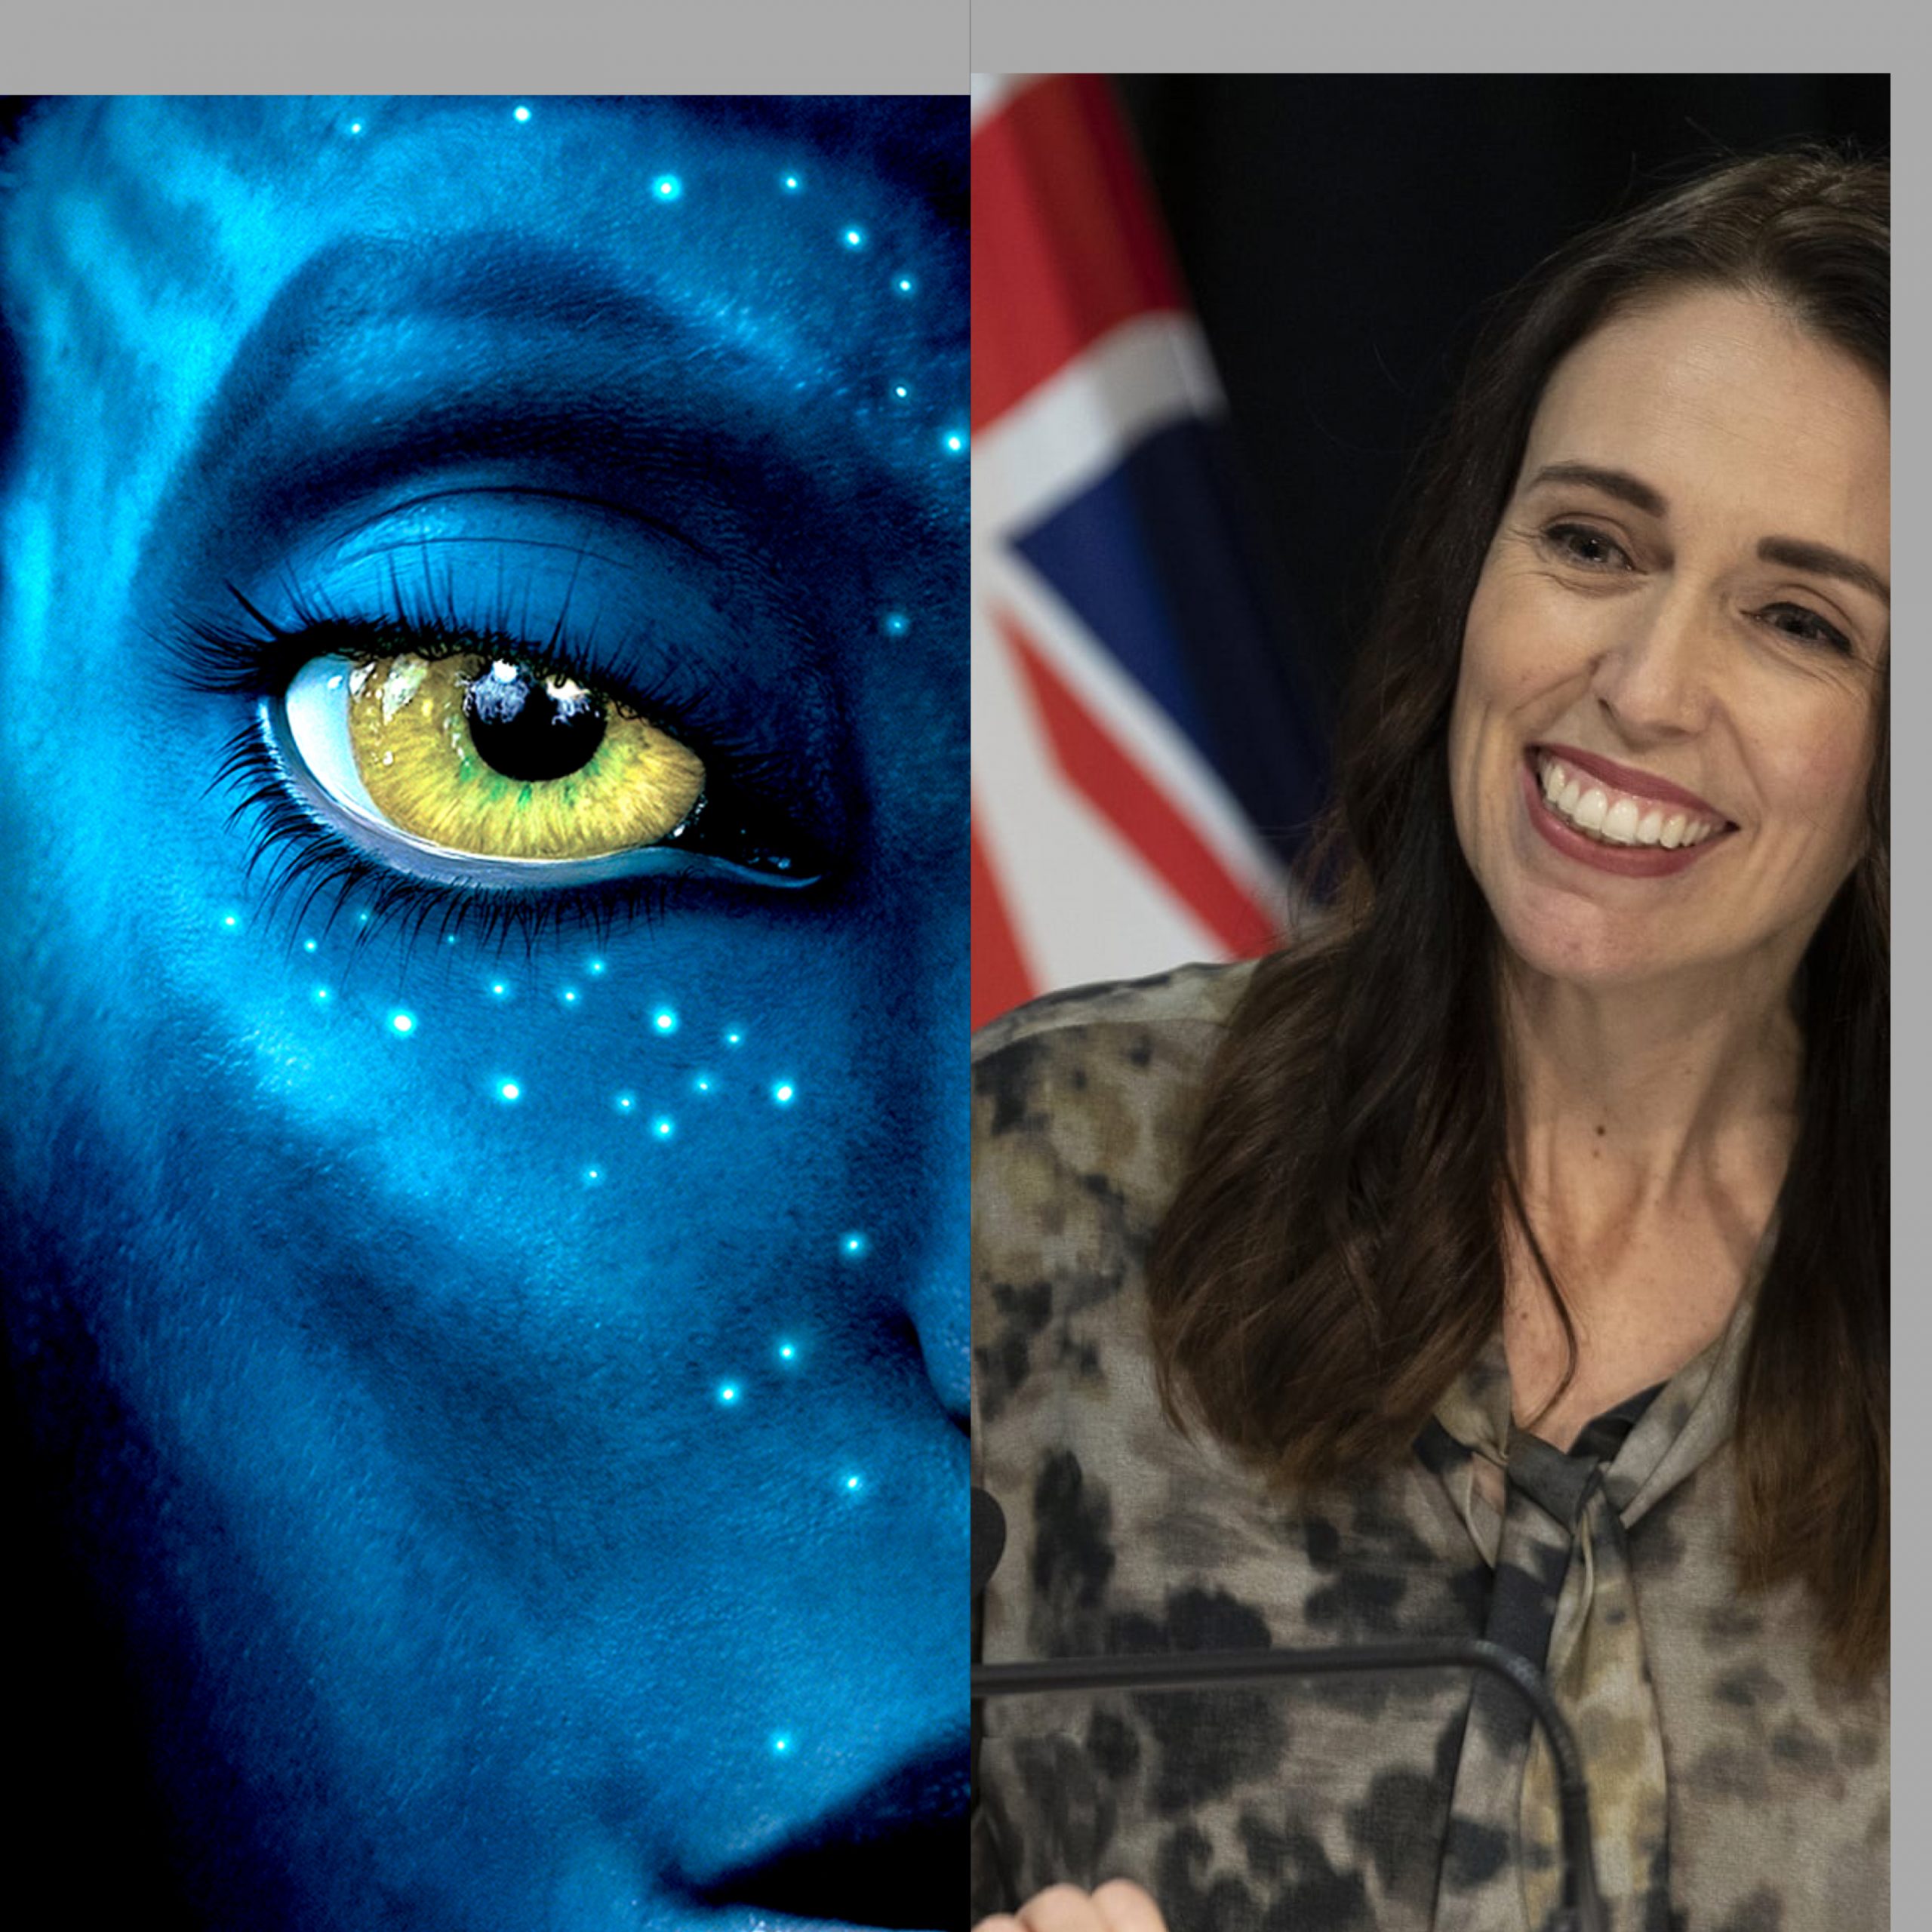 Avatar and New Zealand’s PM